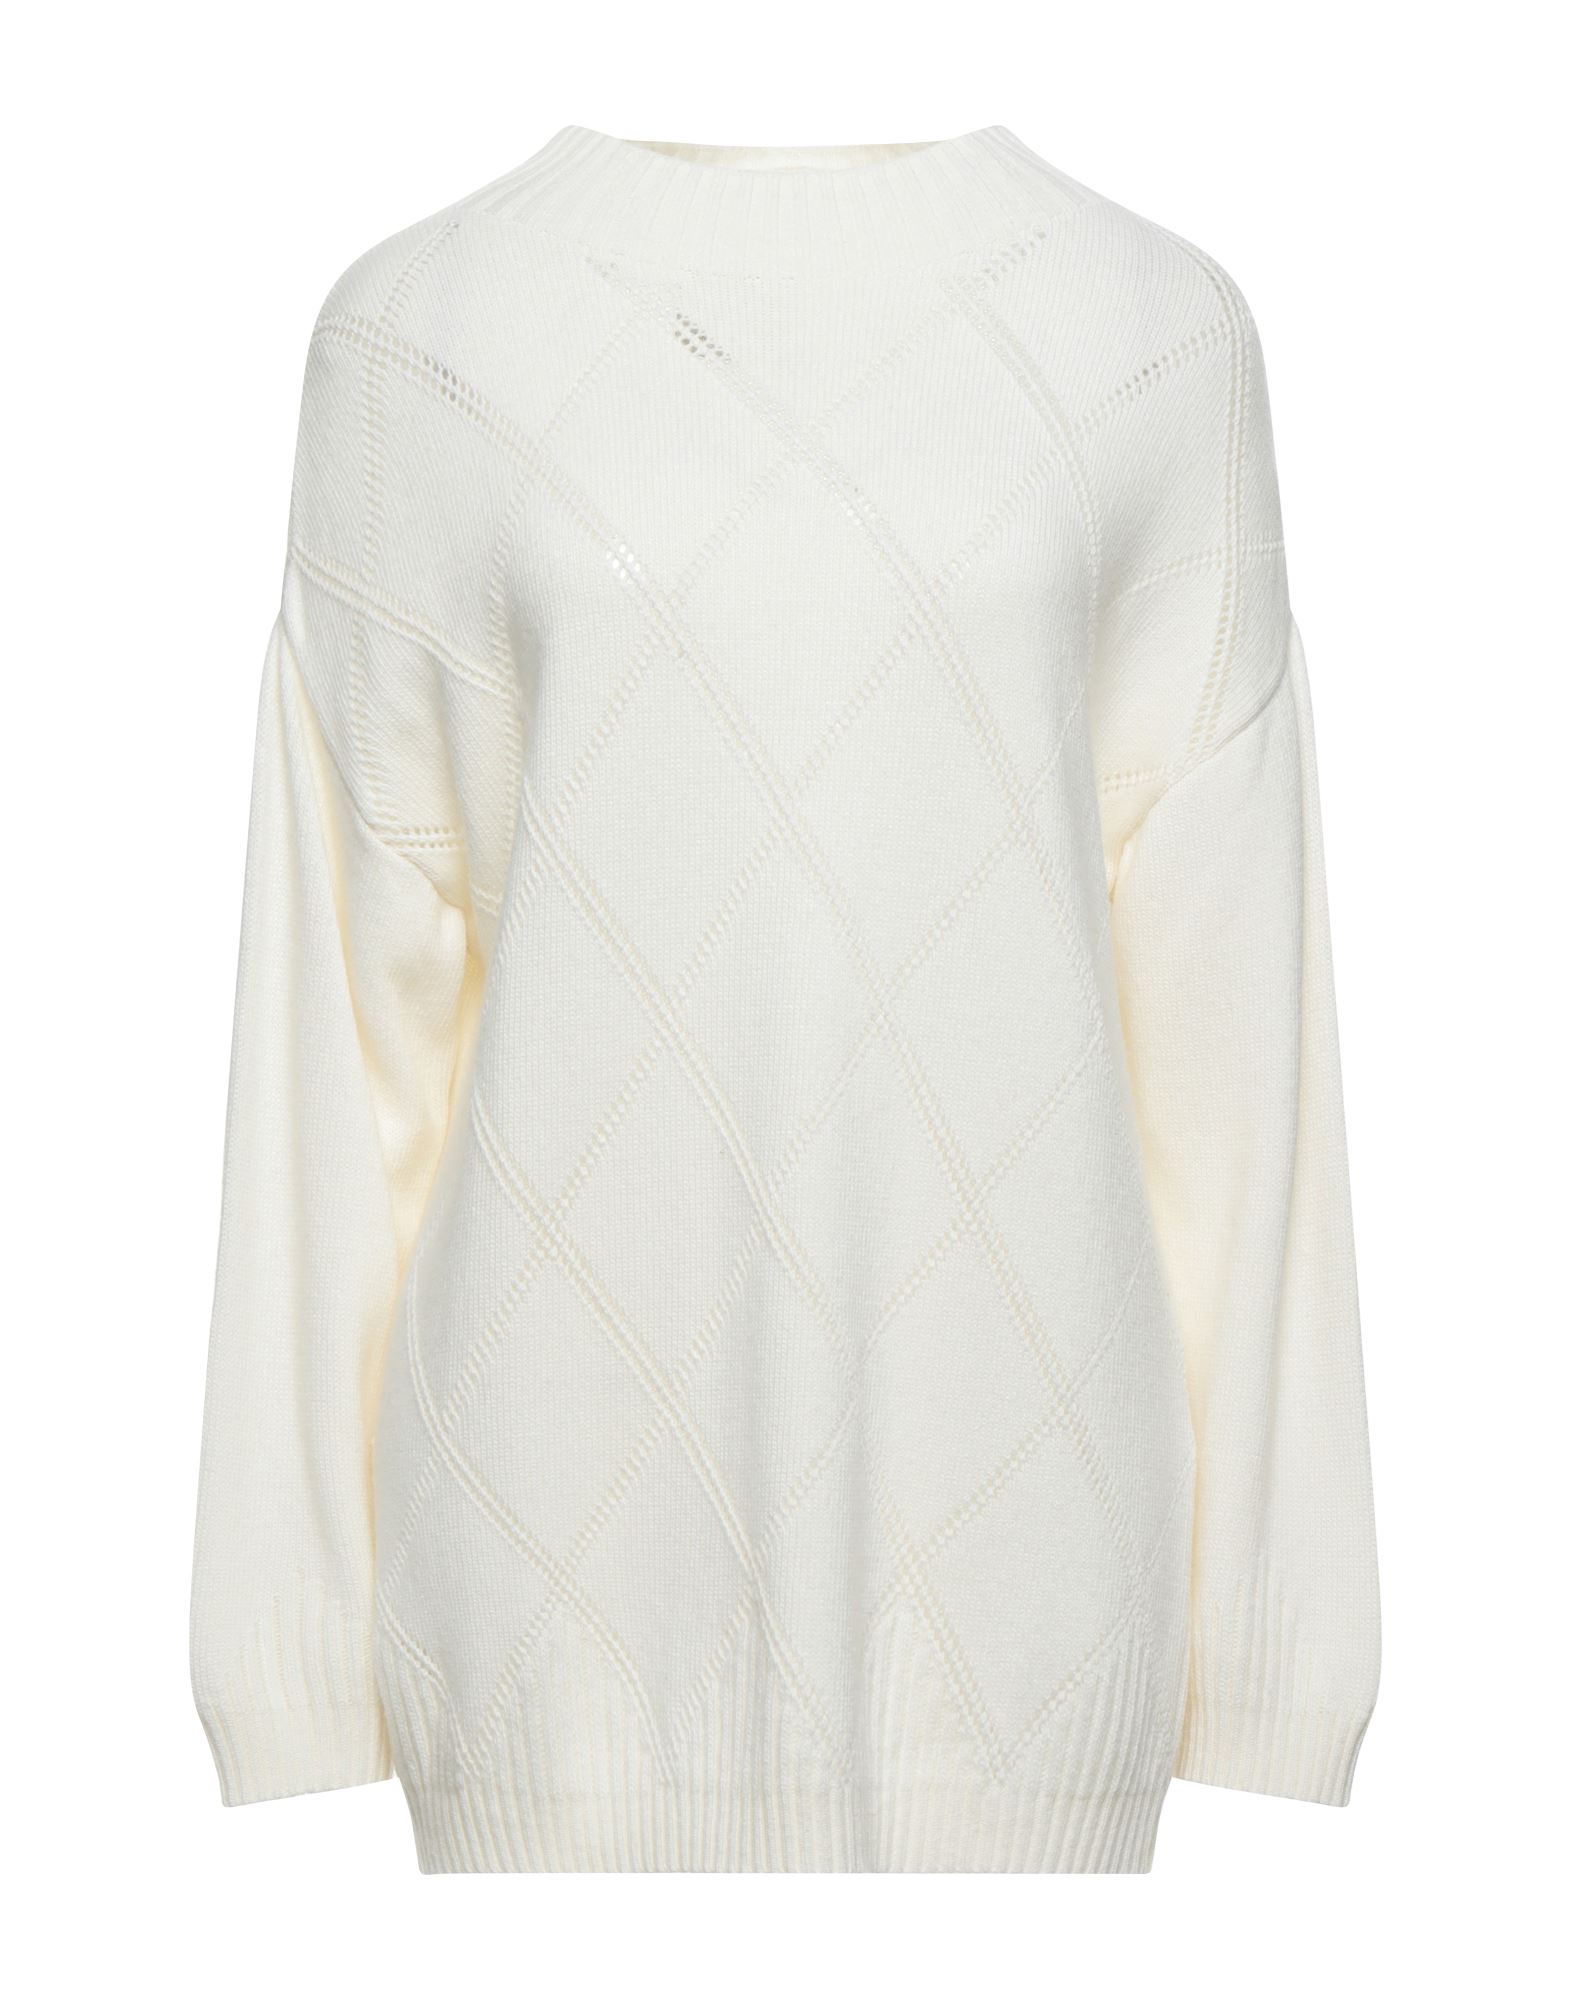 N.o.w. Andrea Rosati Cashmere Sweaters In Ivory